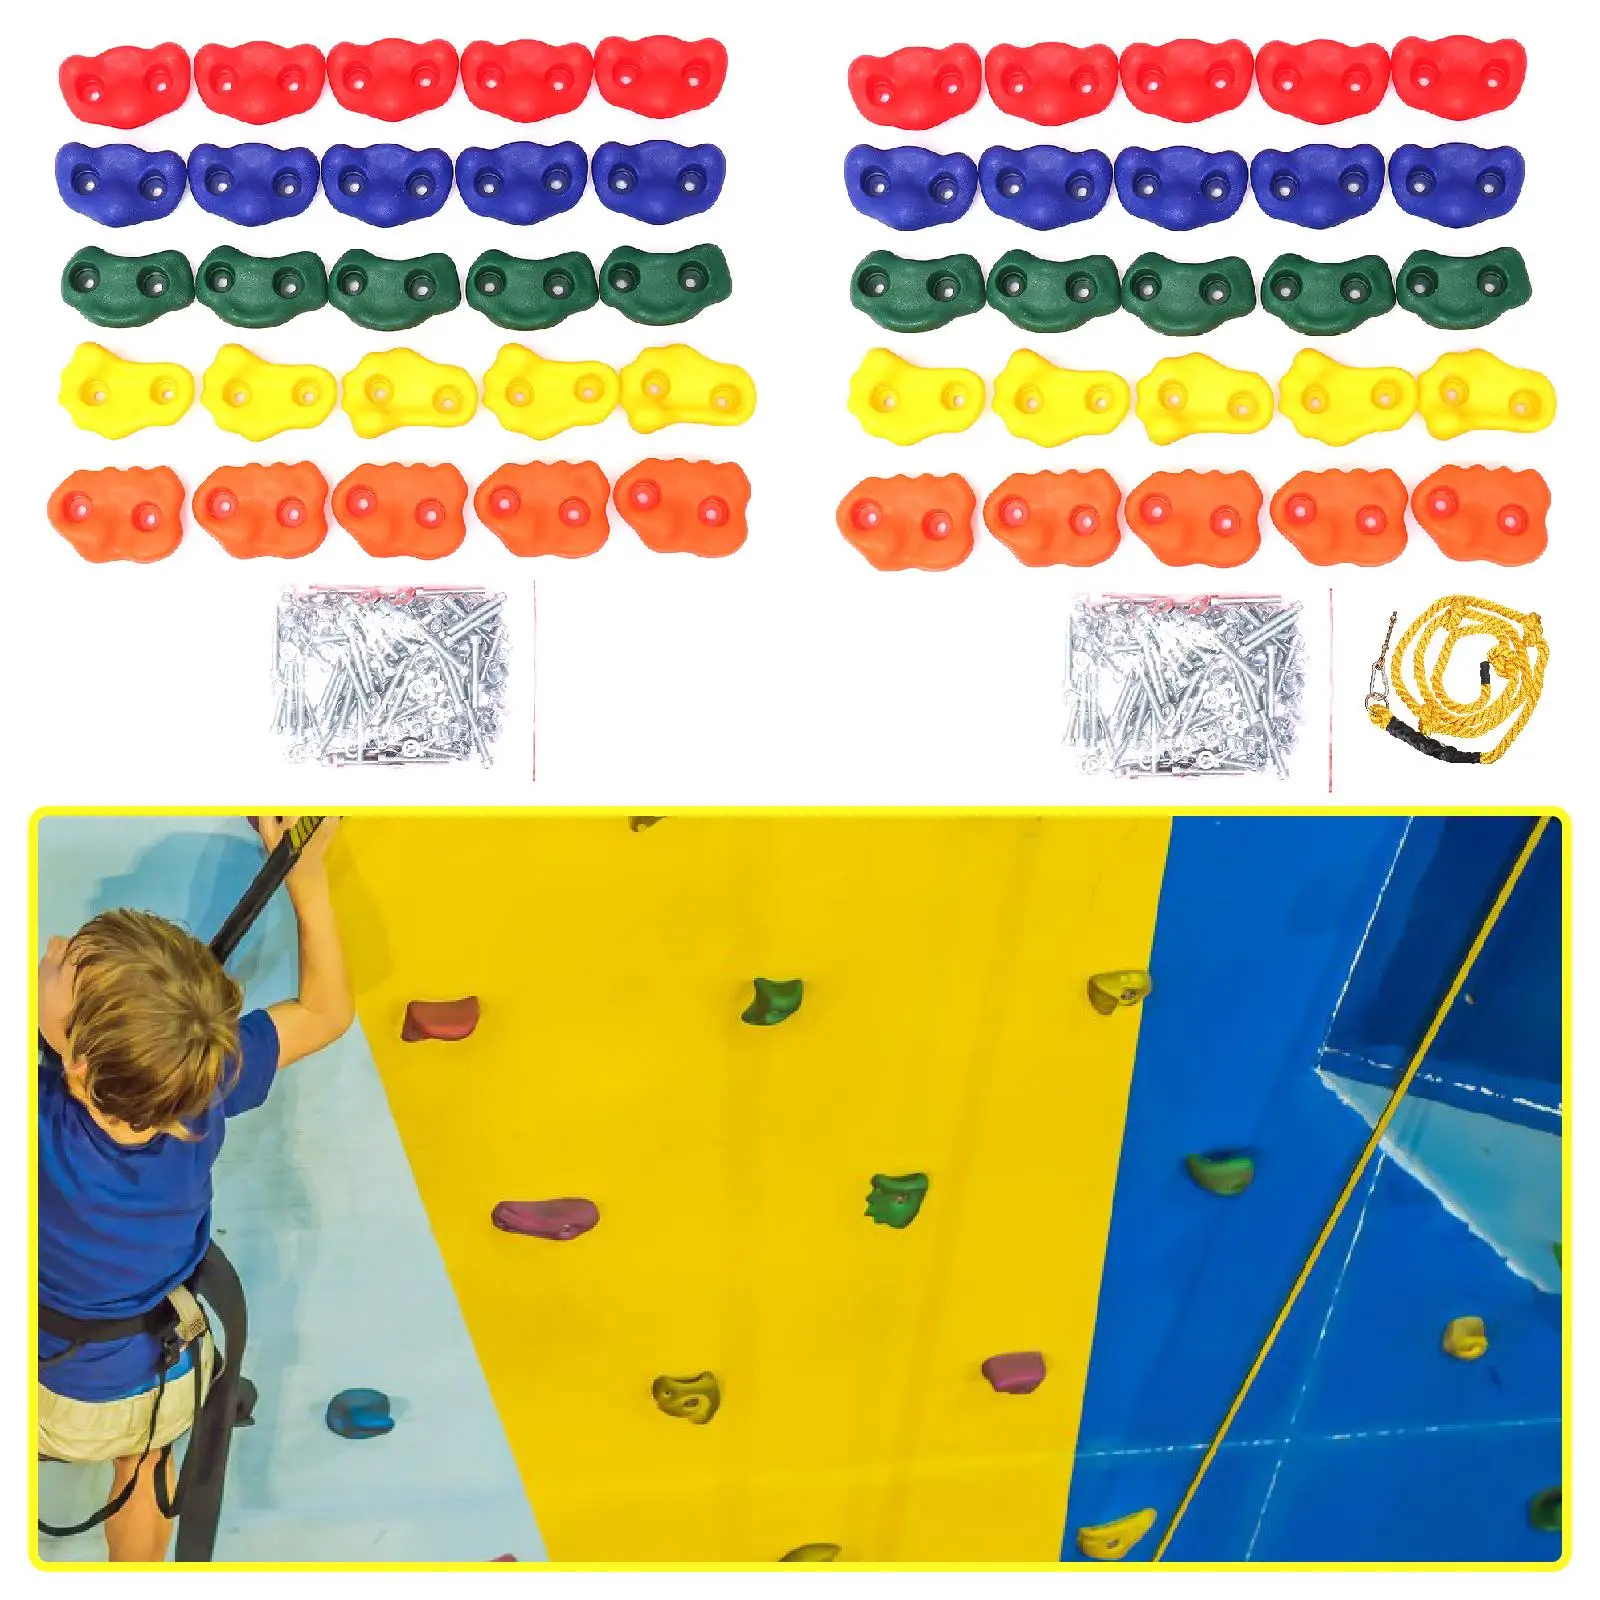 25 Pieces Rock Climbing Holds for Kids Outdoor Games with Mounting Hardware Developing Children Flexibility Climbing Rocks